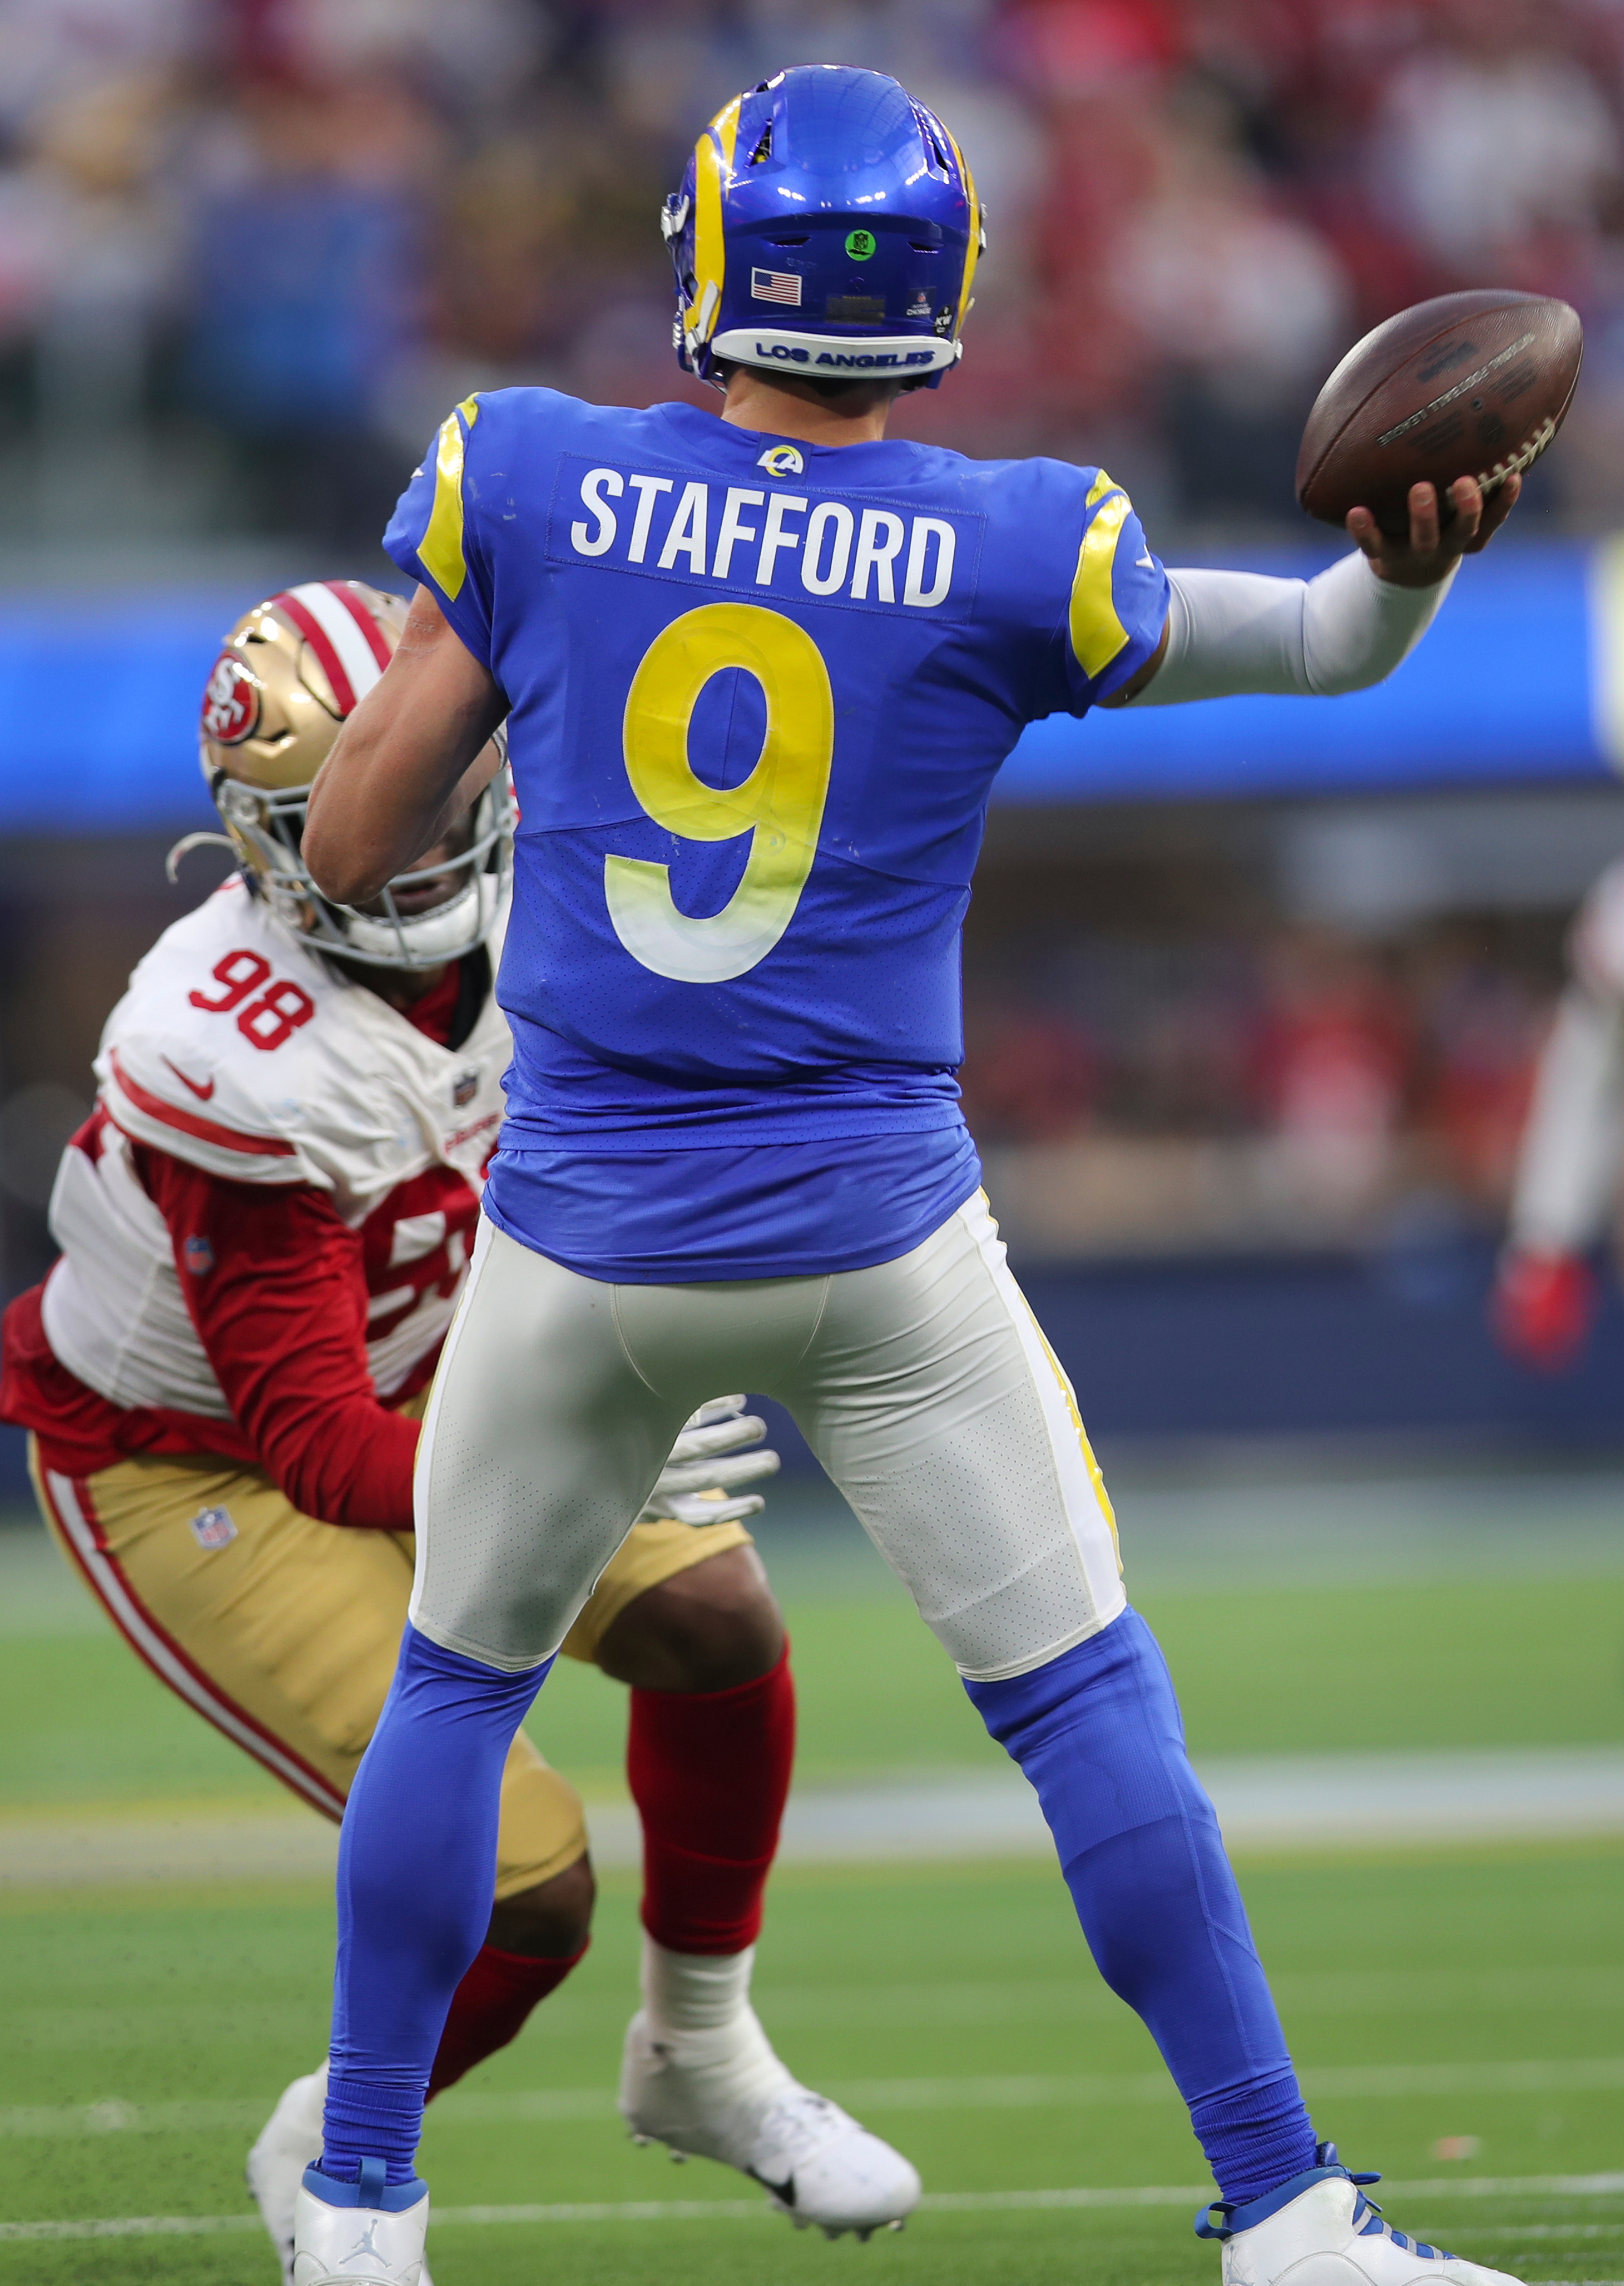 Matthew Stafford #9 of the Los Angeles Rams passes during the game against the San Francisco 49ers at SoFi Stadium on January 9, 2022 in Inglewood, California. The 49ers defeated the Rams 27-24.